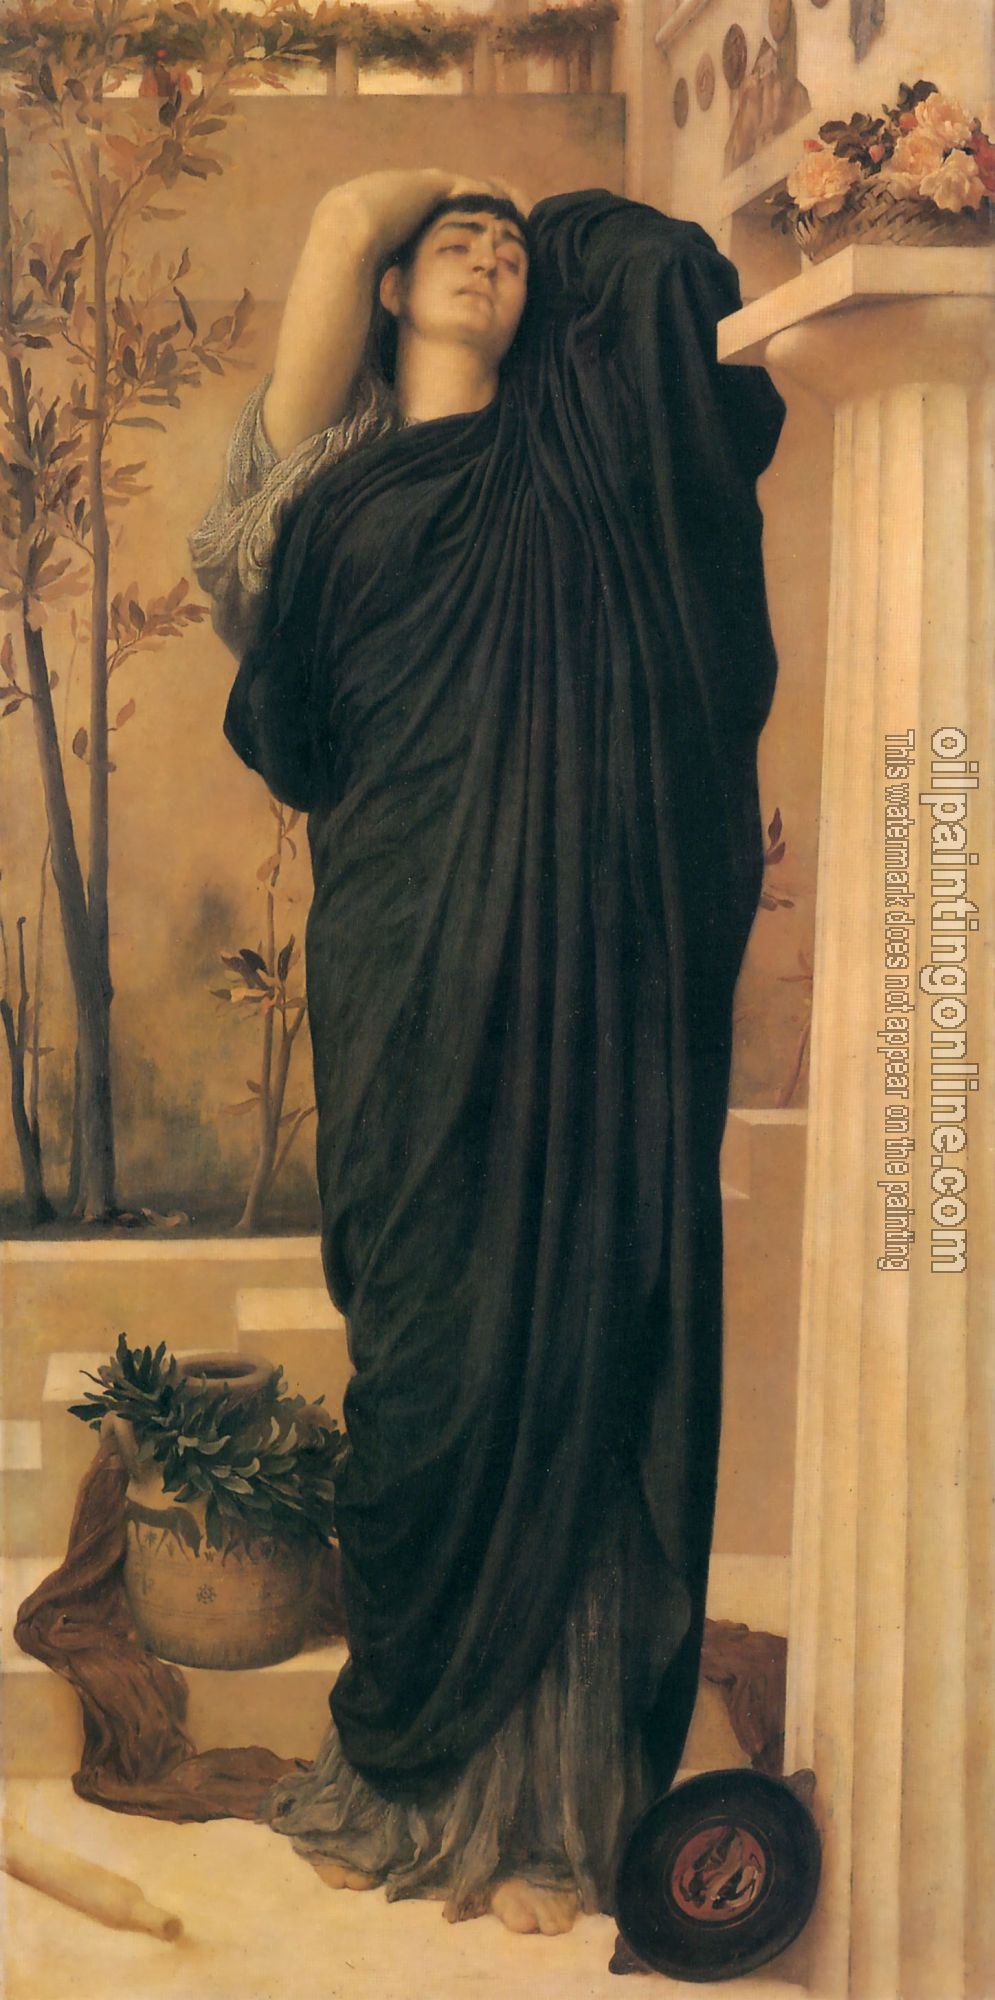 Leighton, Lord Frederick - Electra at the Tomb of Agamemnon